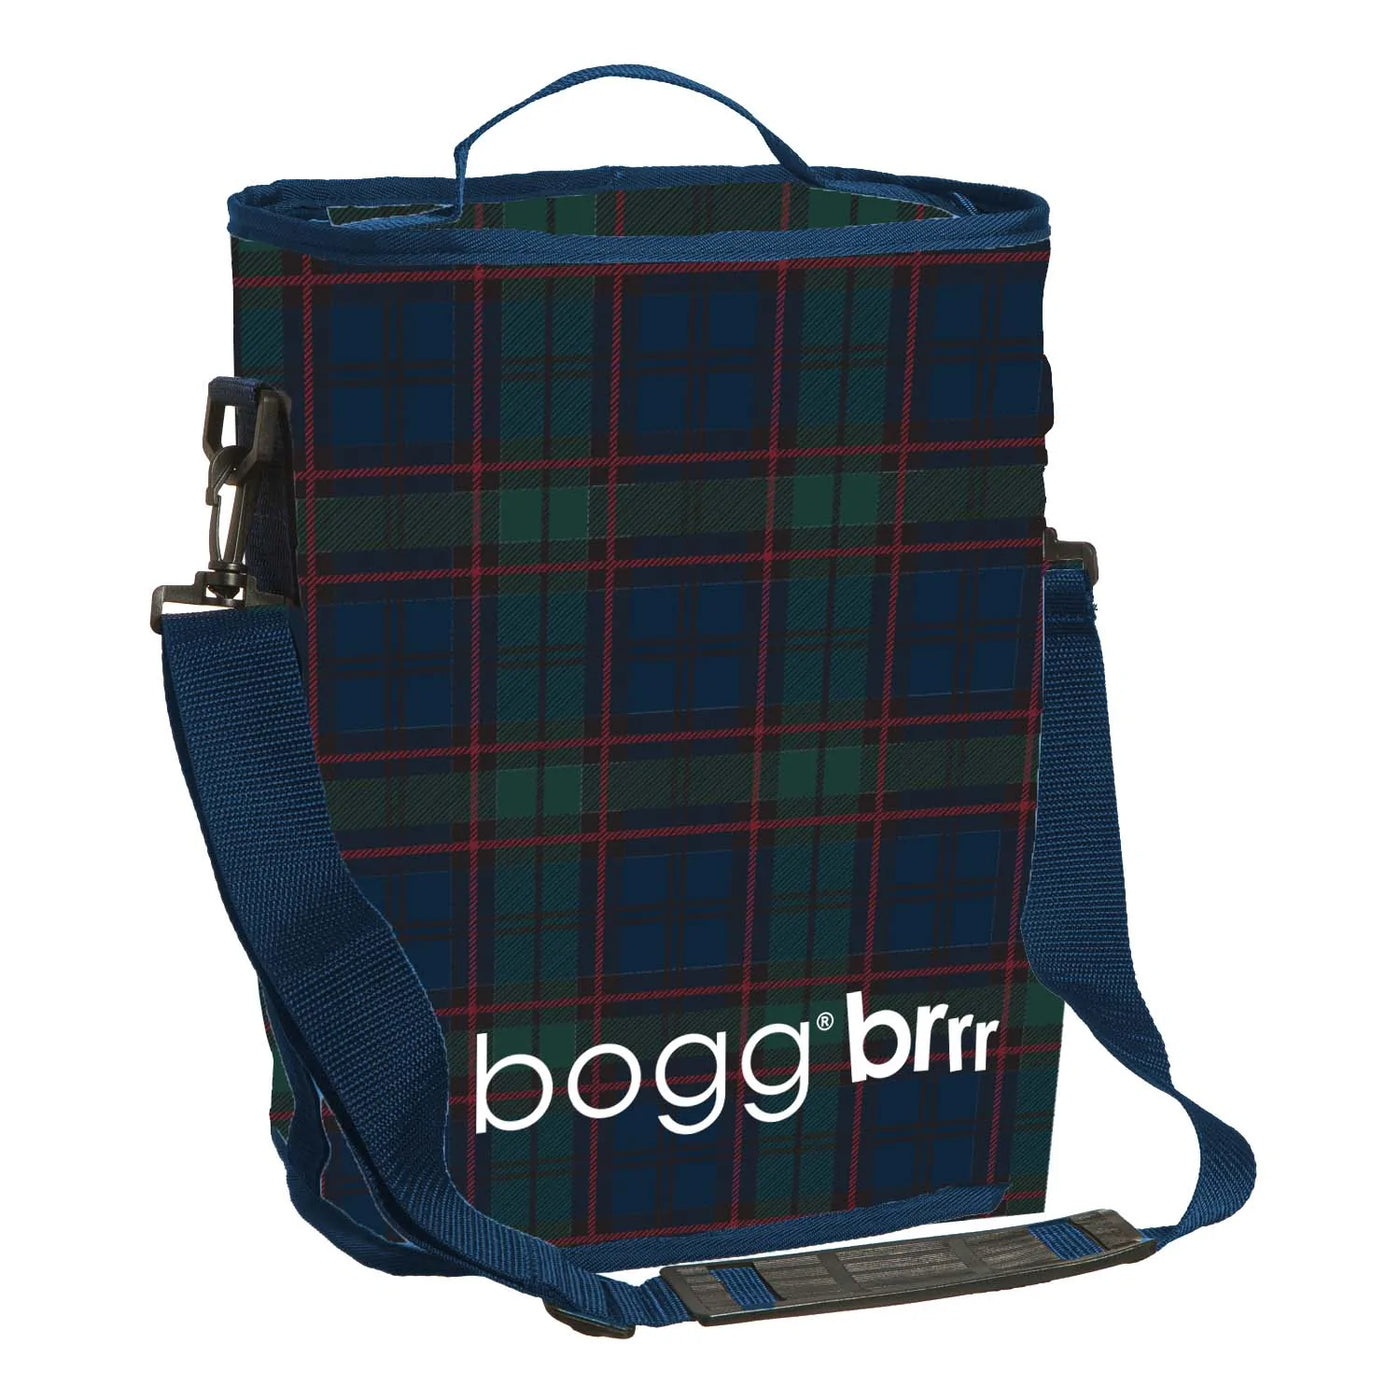 Bogg Brrr and a Half Cooler Insert - Various Colors / Patterns